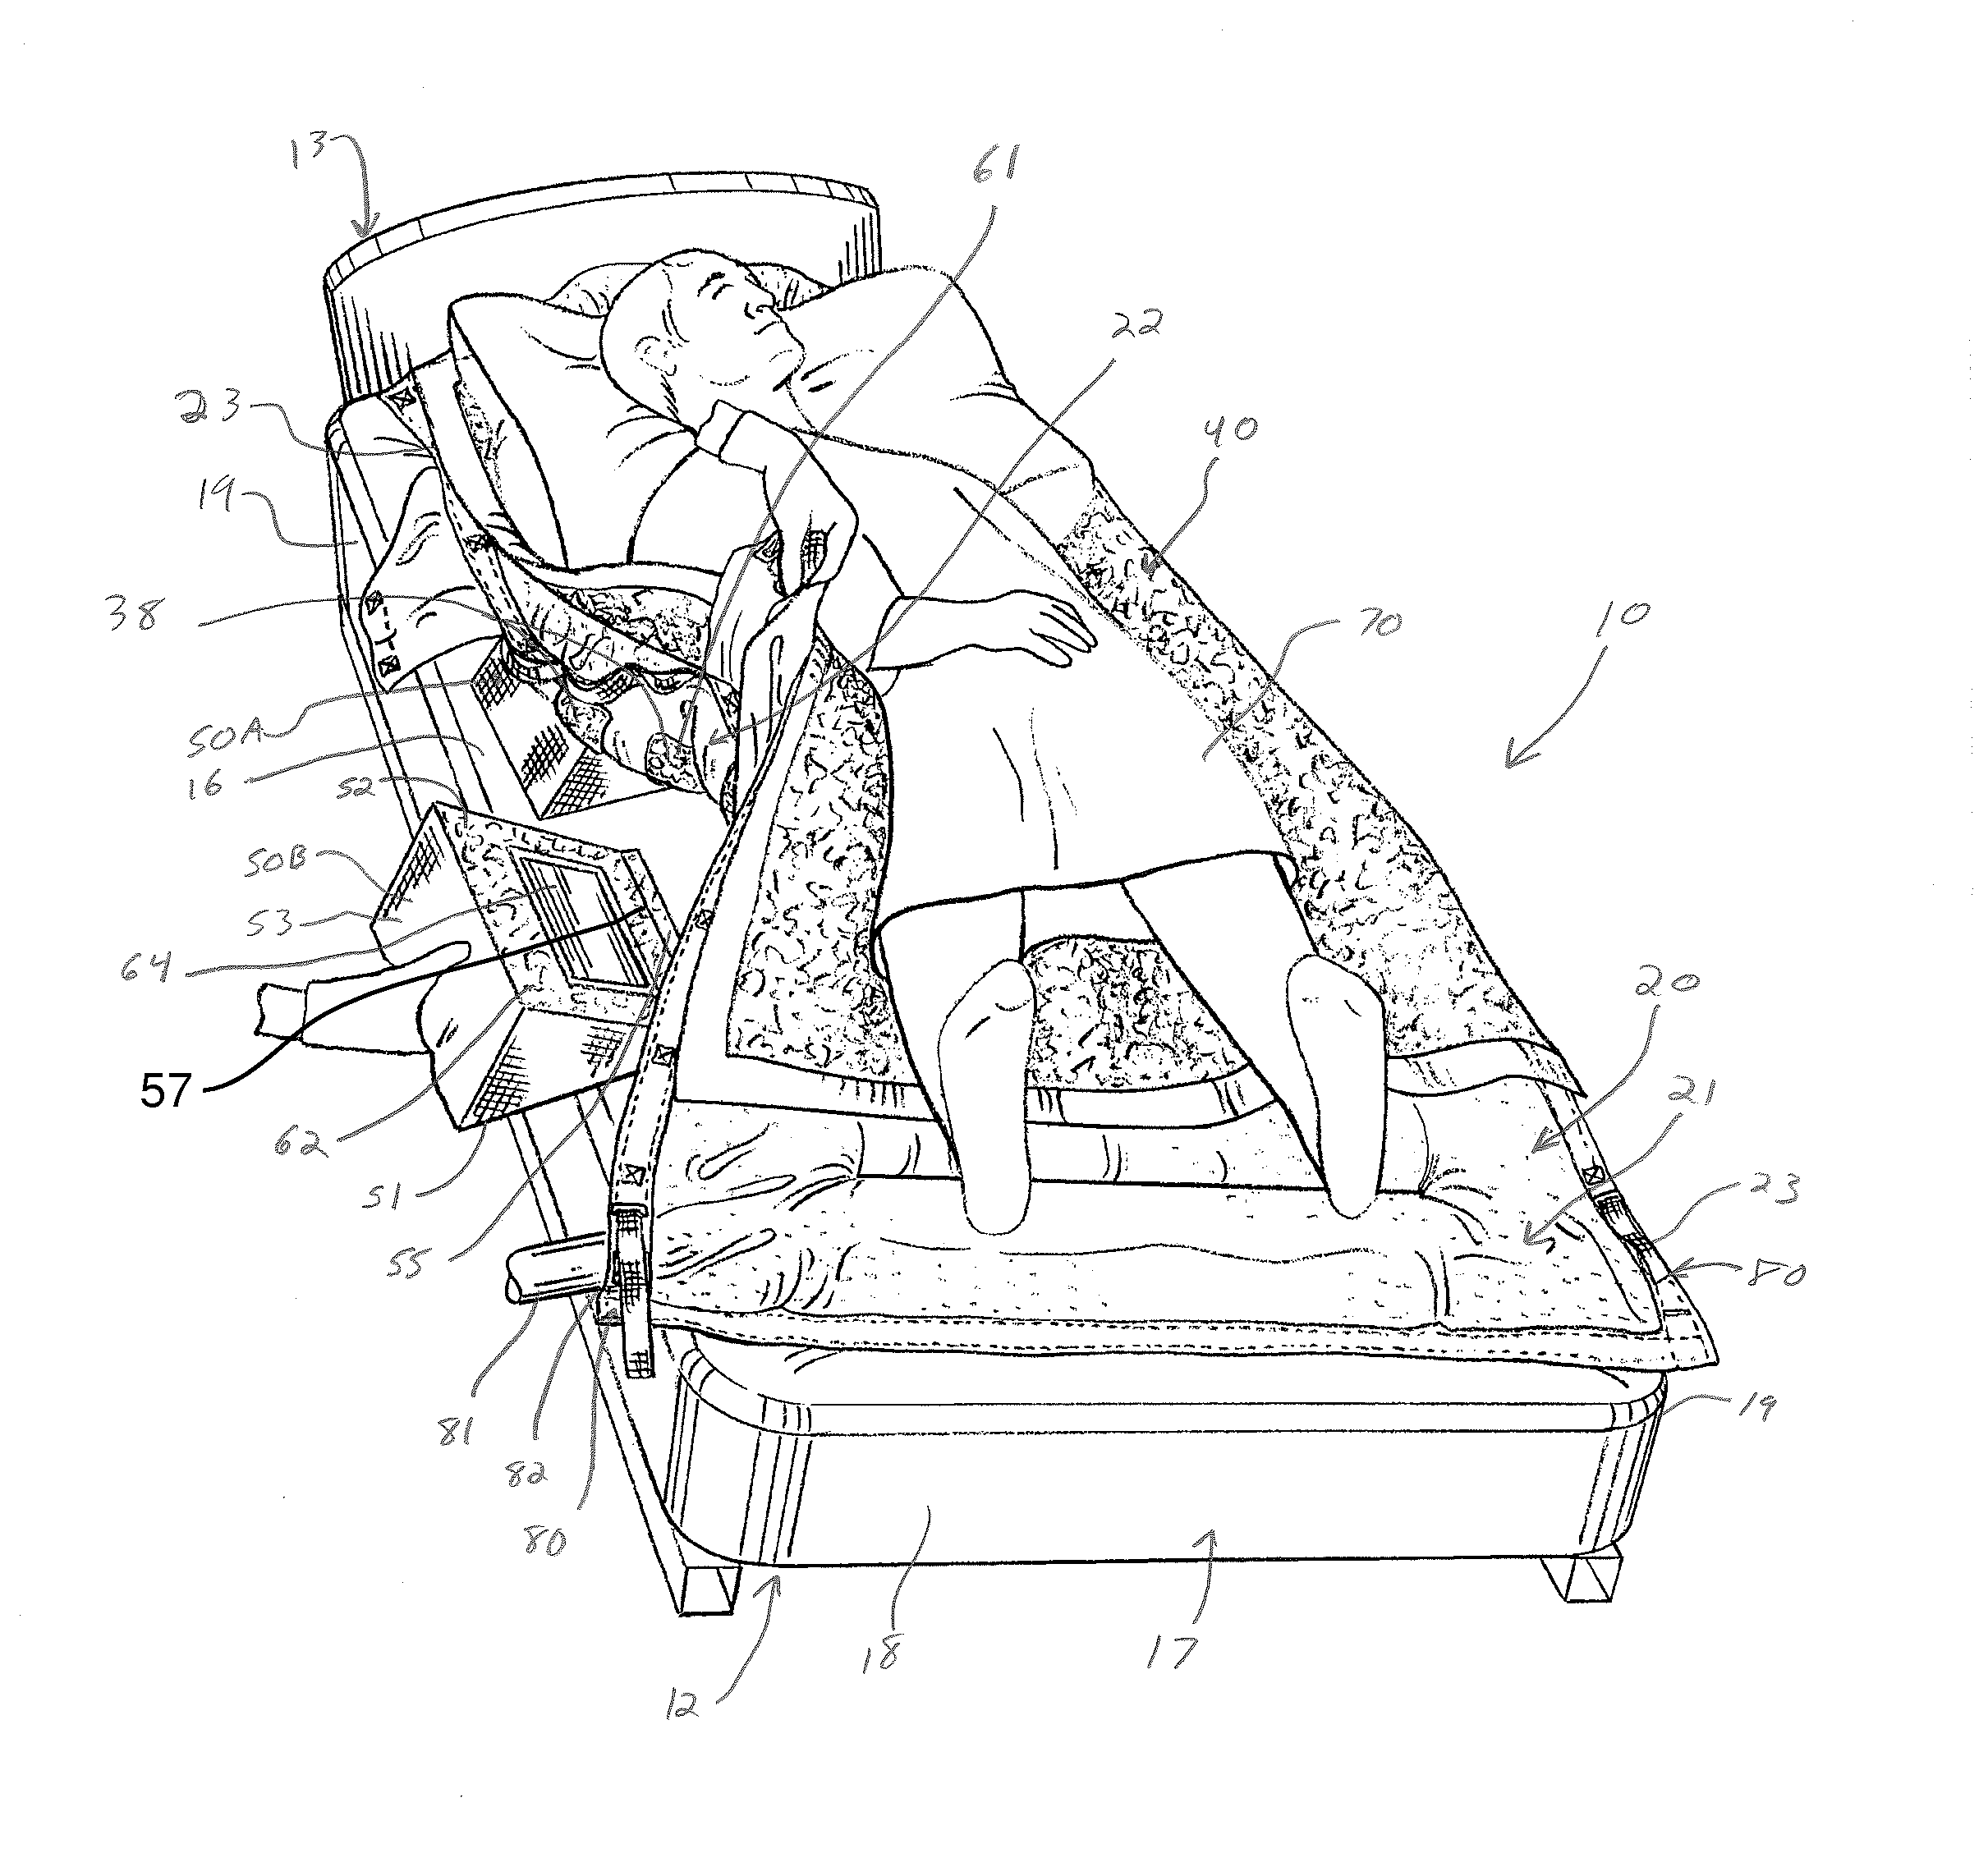 Apparatus and System for Boosting, Transferring, Turning and Positioning a Patient